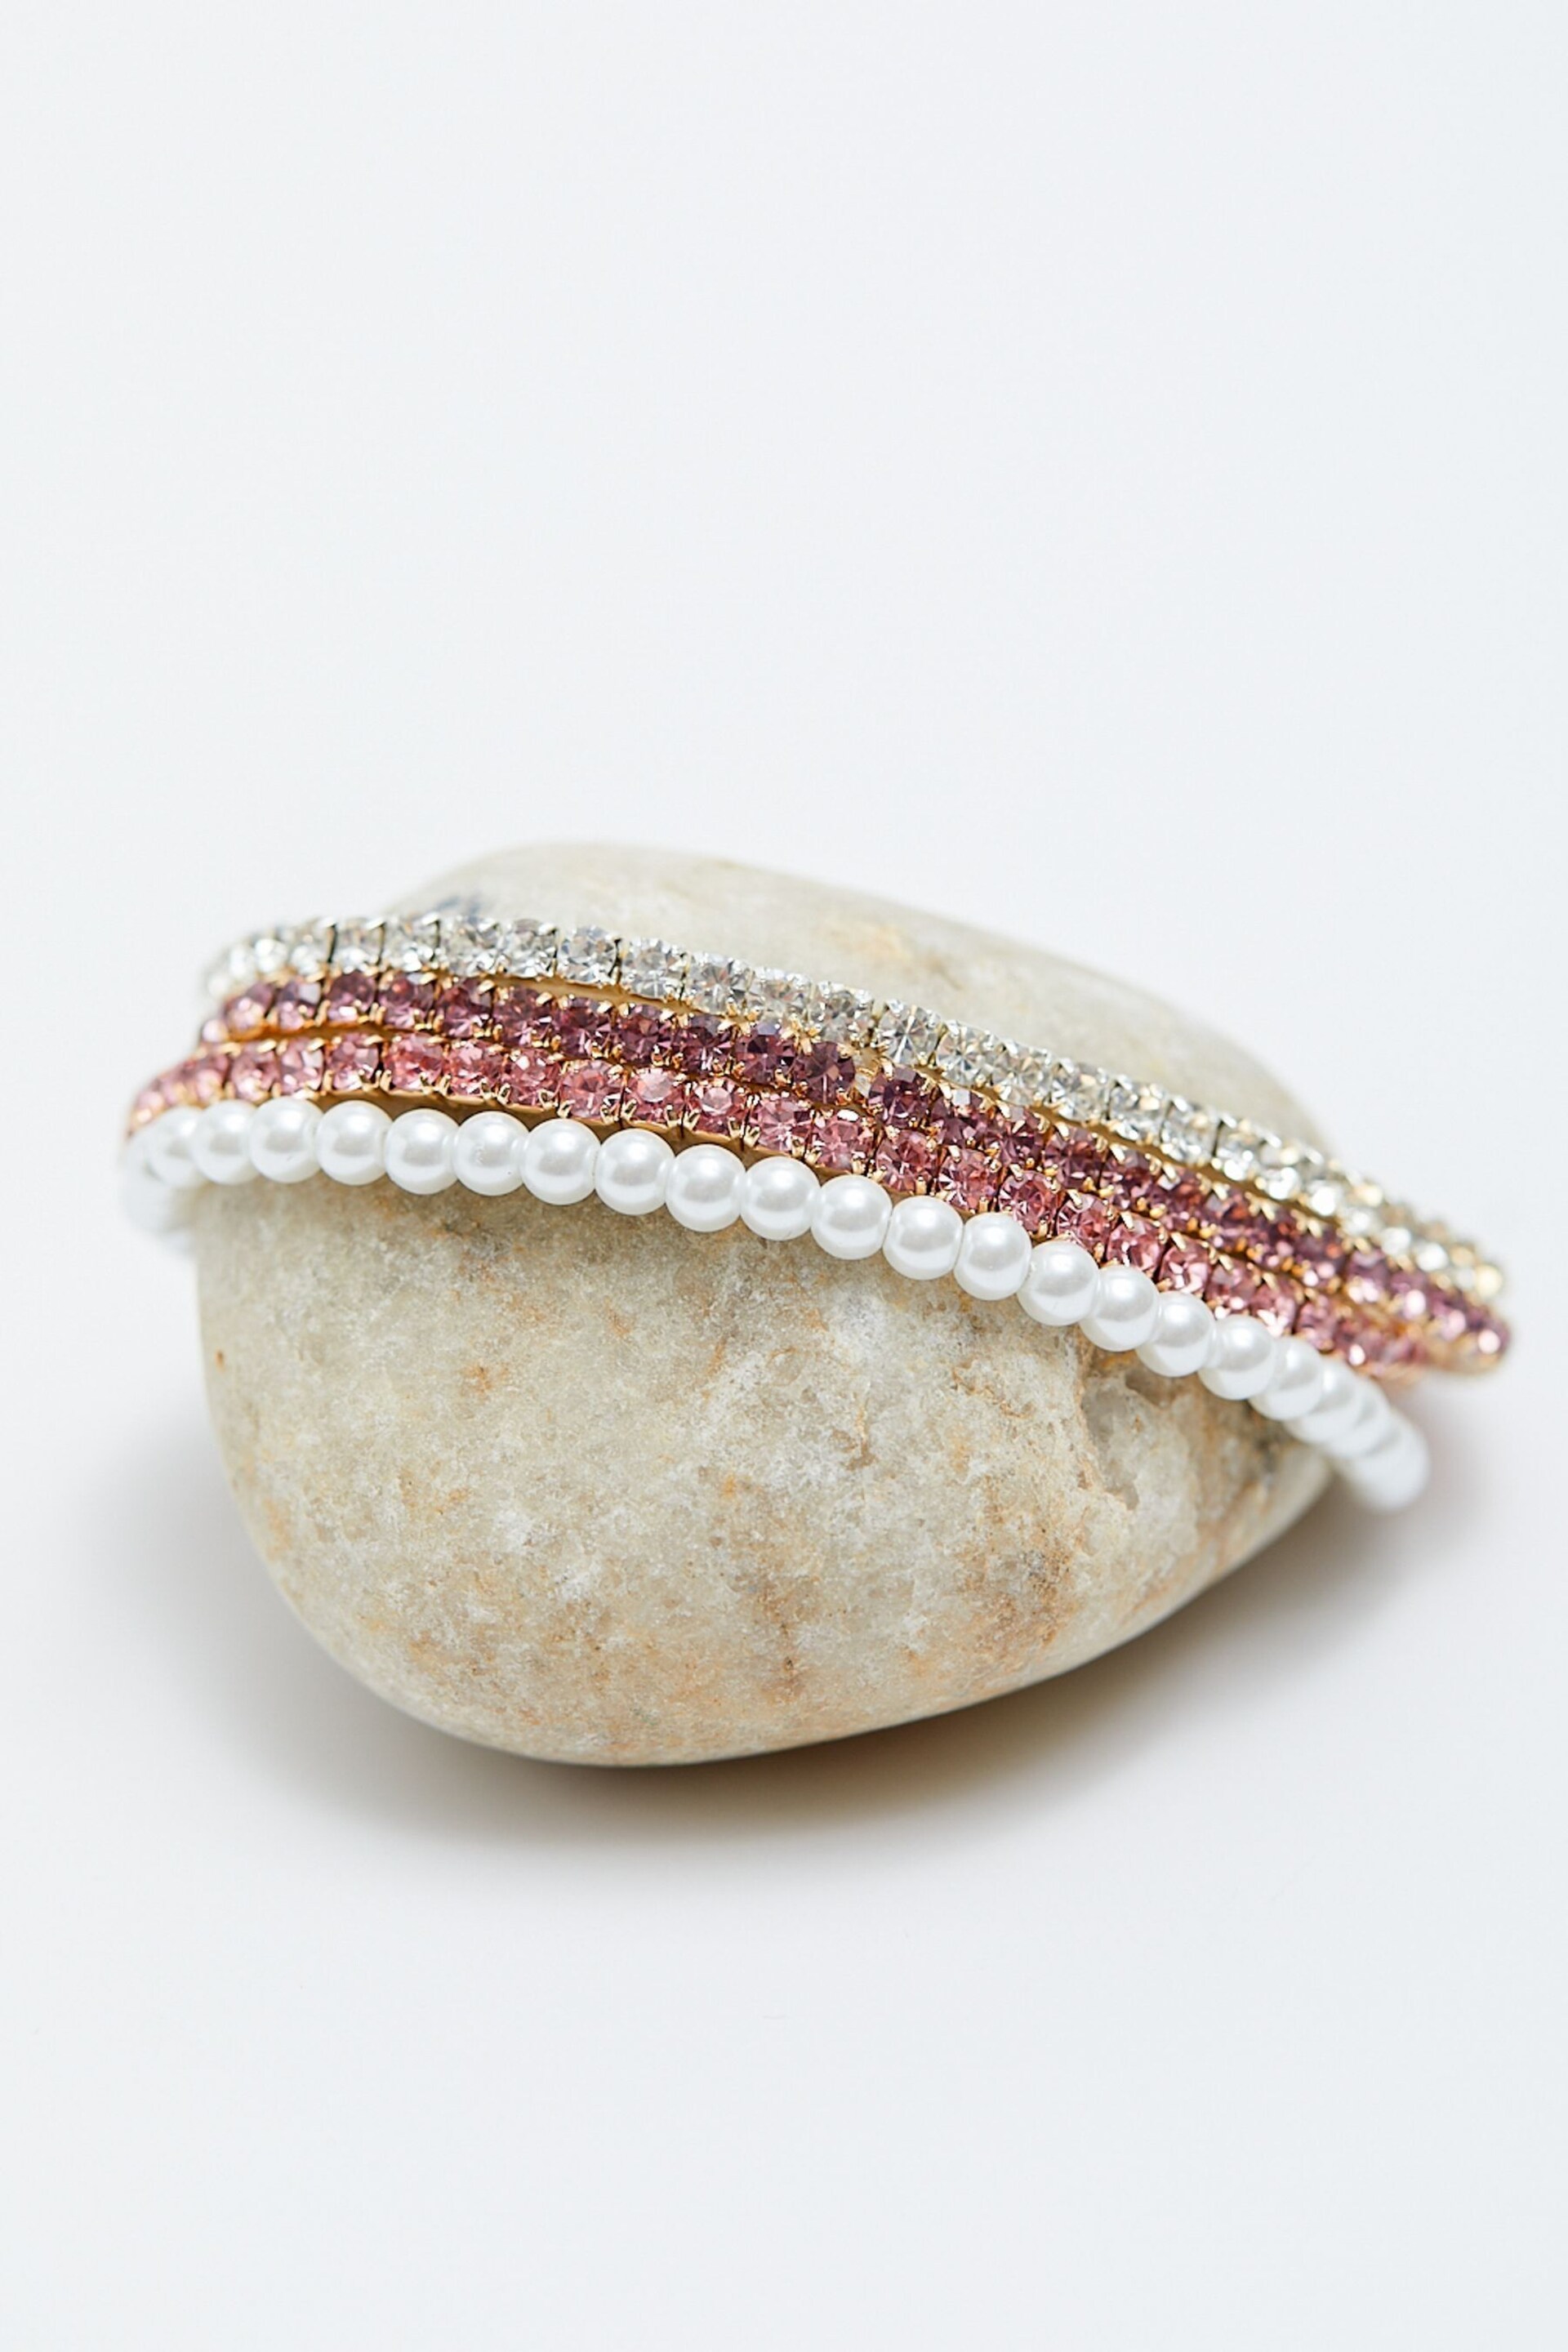 Mood Multi Tonal And Pearl Stretch Bracelets 4 Pack - Image 4 of 4